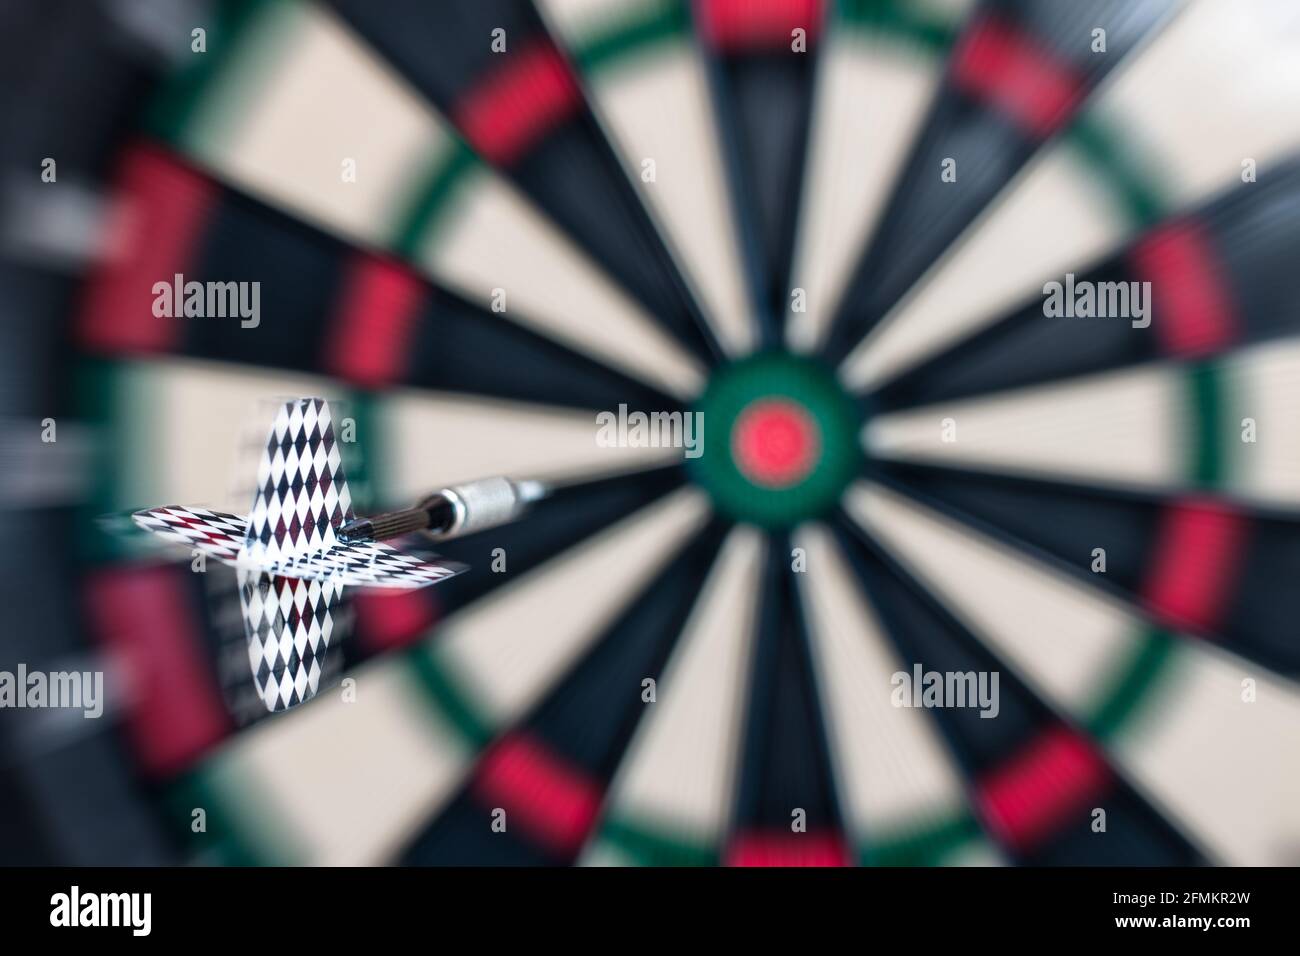 Blurred motion image of a dart flying towards the bull's eye of a target. Playing concept Stock Photo